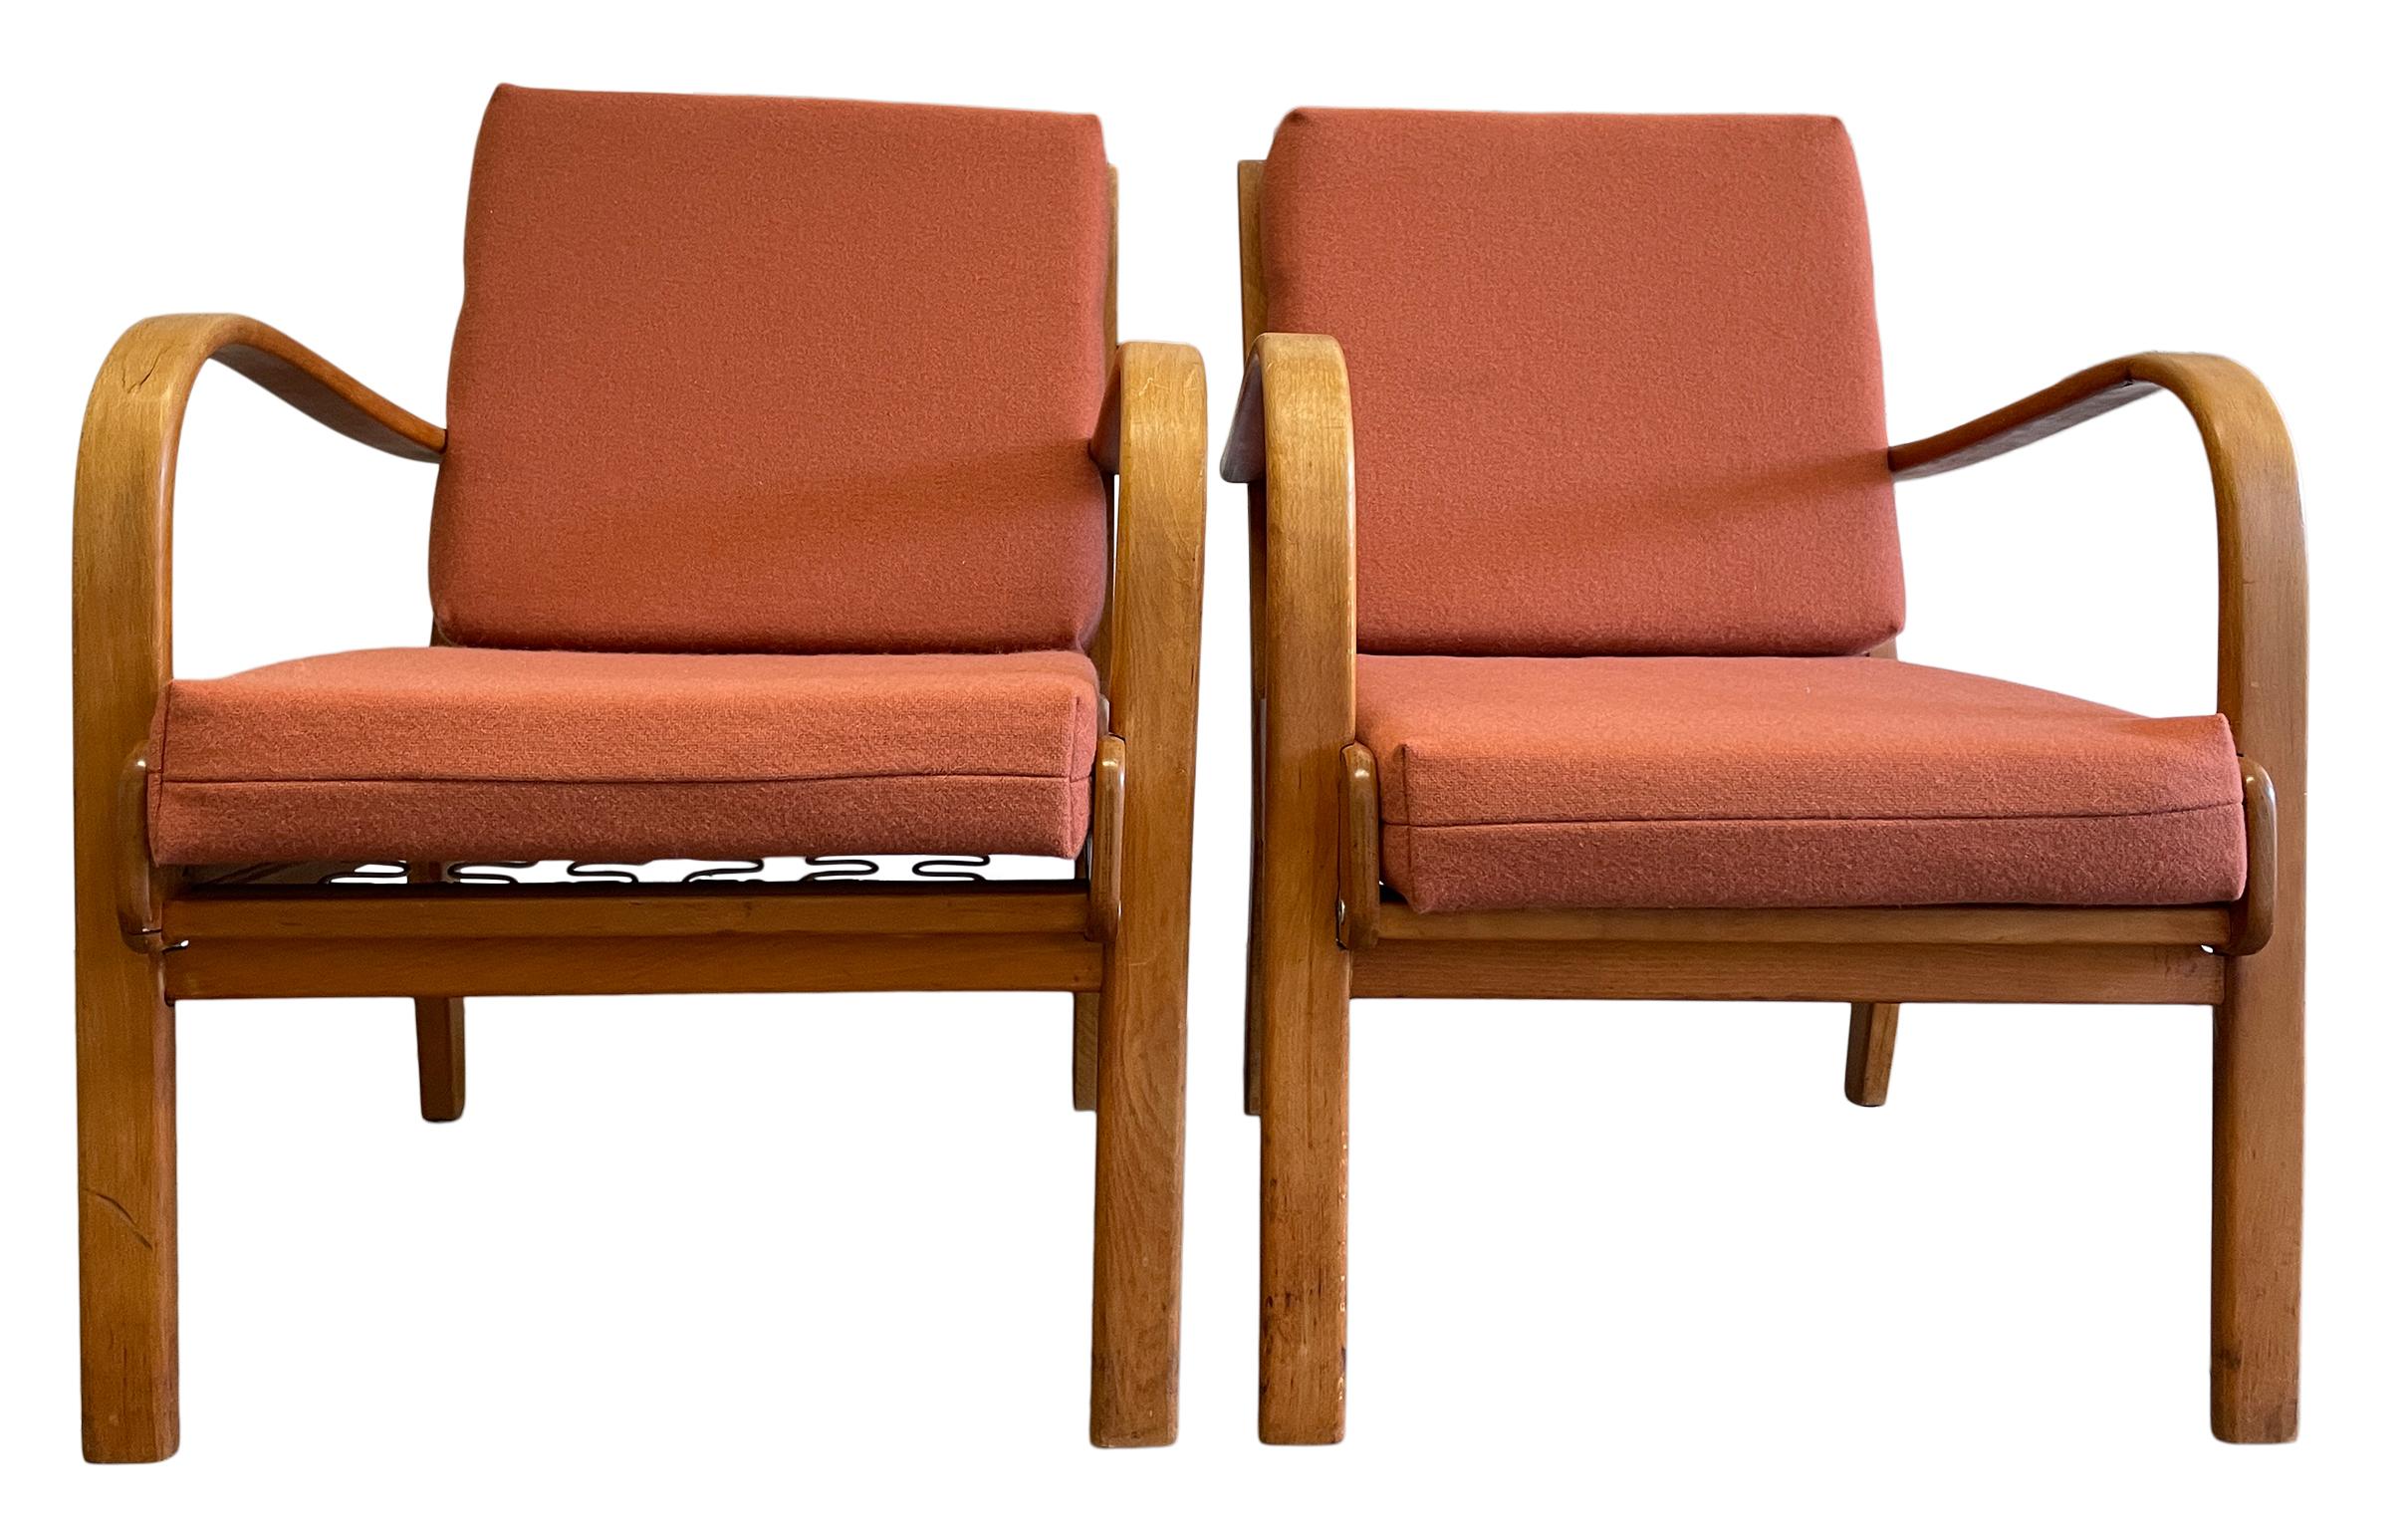 Pair of original rare Swedish all blonde low lounge chairs with wool Velvet. Solid birch bentwood frames with slatted back and all new wool peach upholstery. Original vintage condition. Frames are solid birch. Made In Sweden. Very rare set of 2